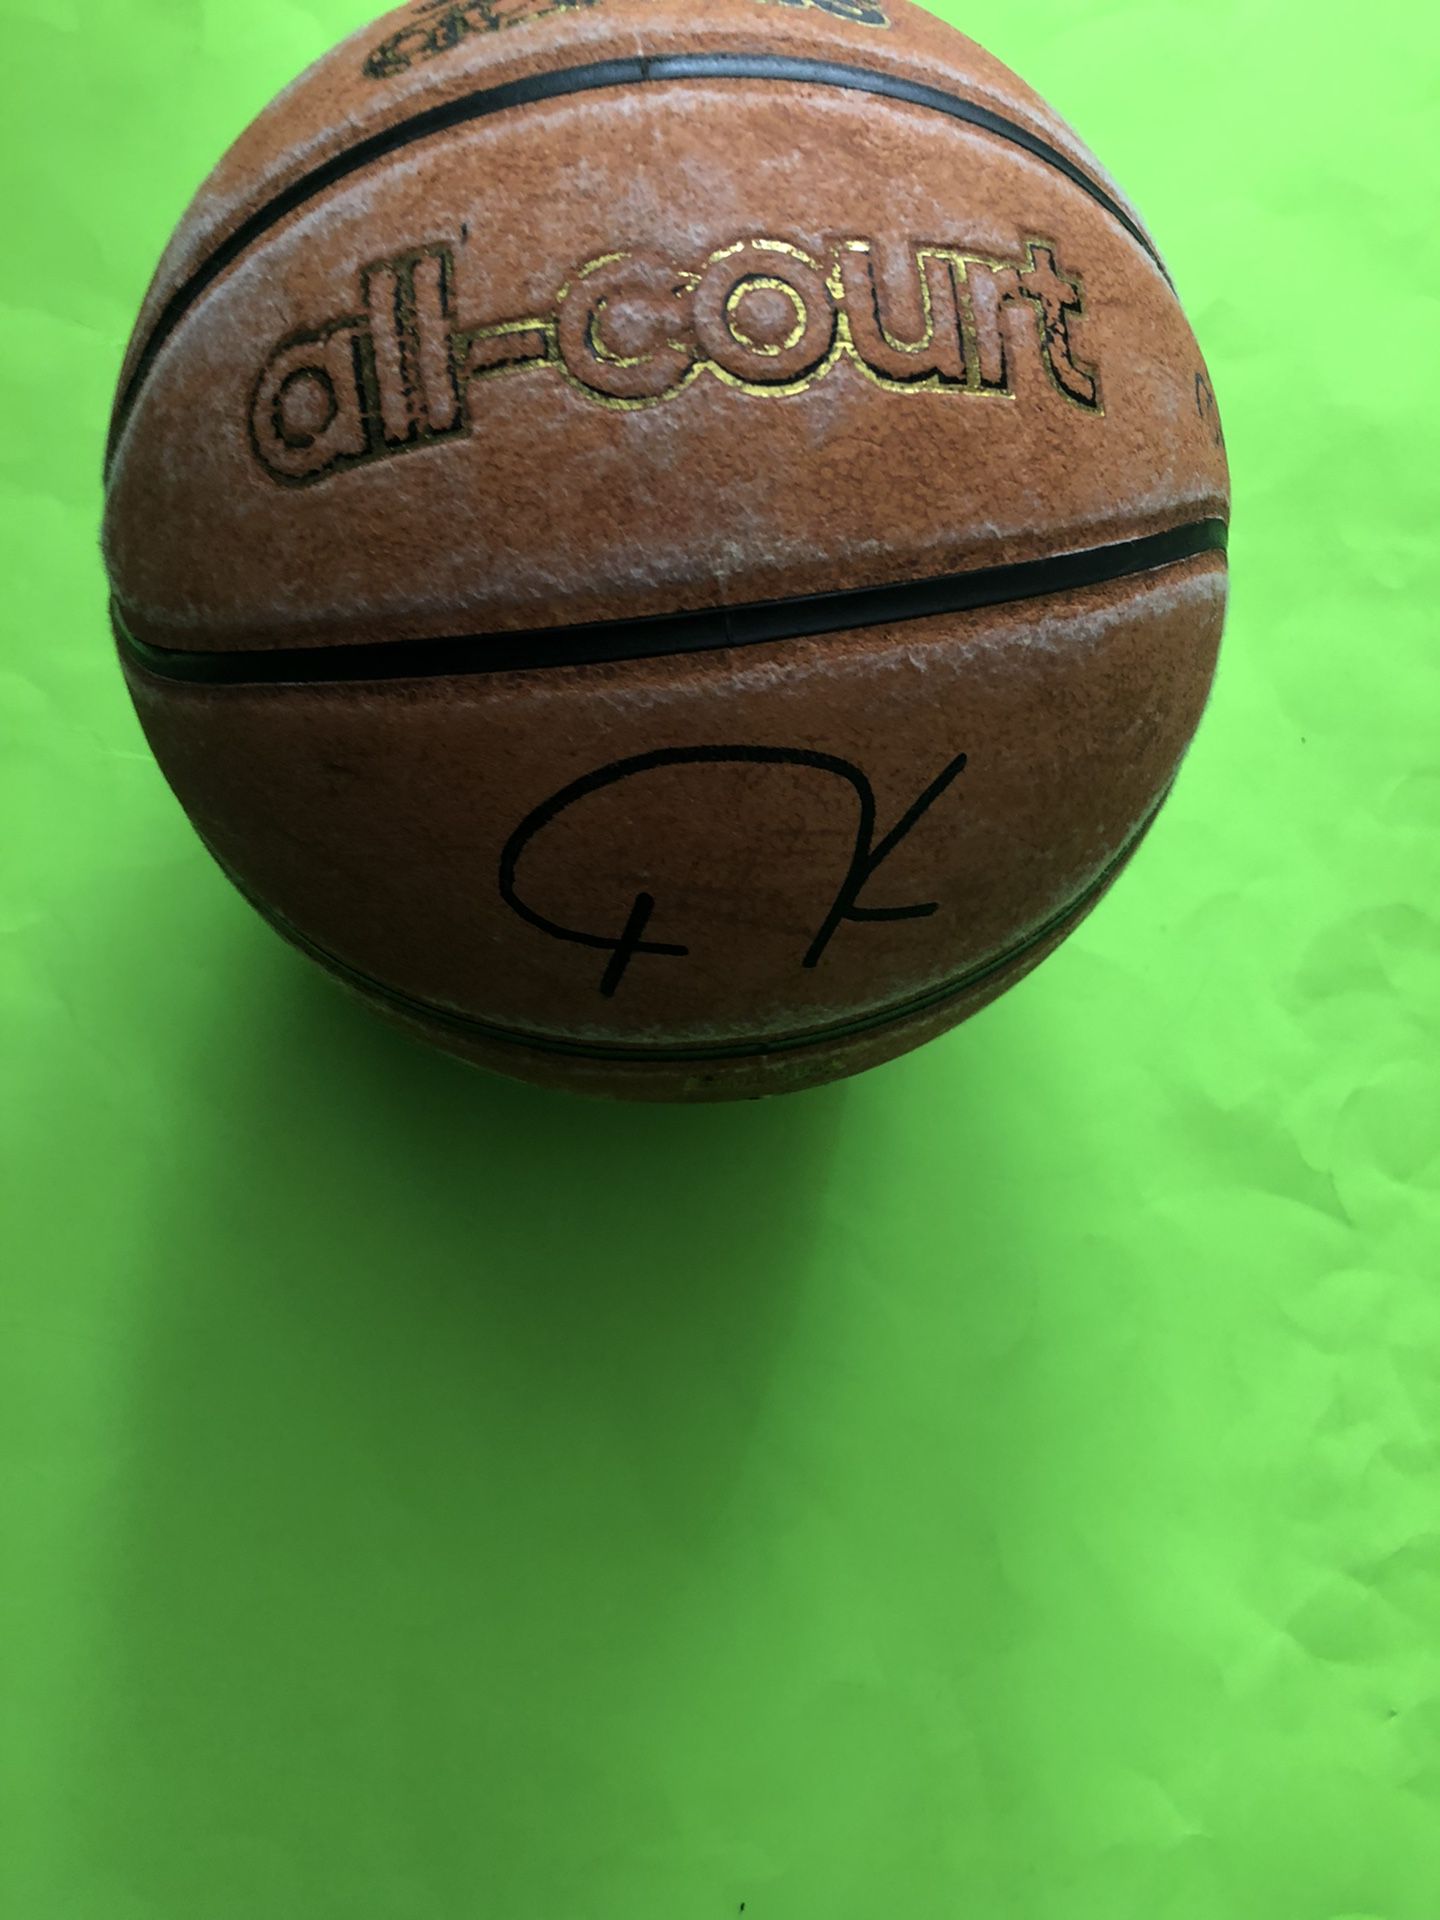 giannis autographed basketball